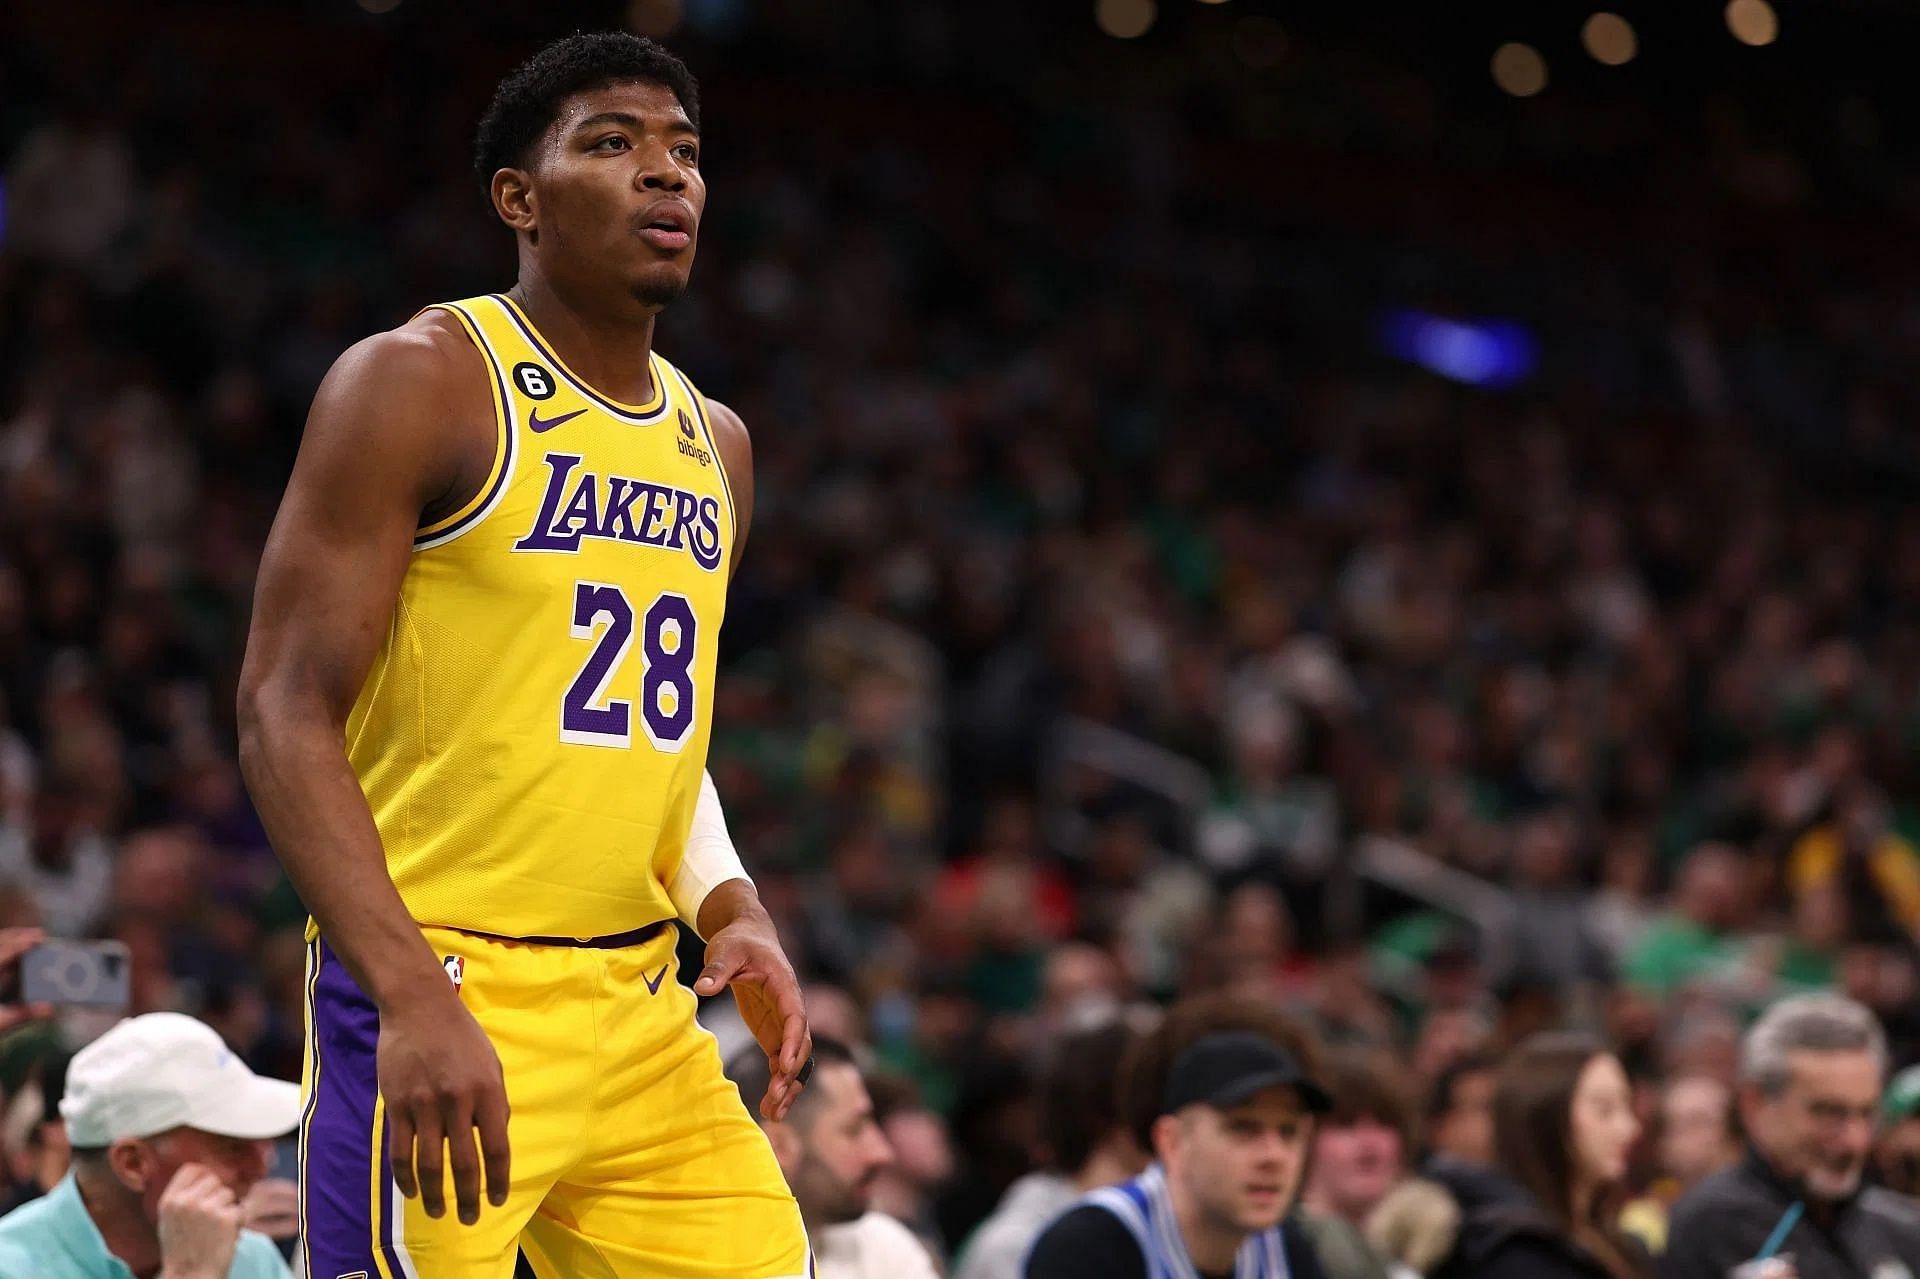 Rui Hachimura is set to return tonight for the LA Lakers against the Houston Rockets but will be wearing a mask after undergoing a procedure to repair a nasal fracture.